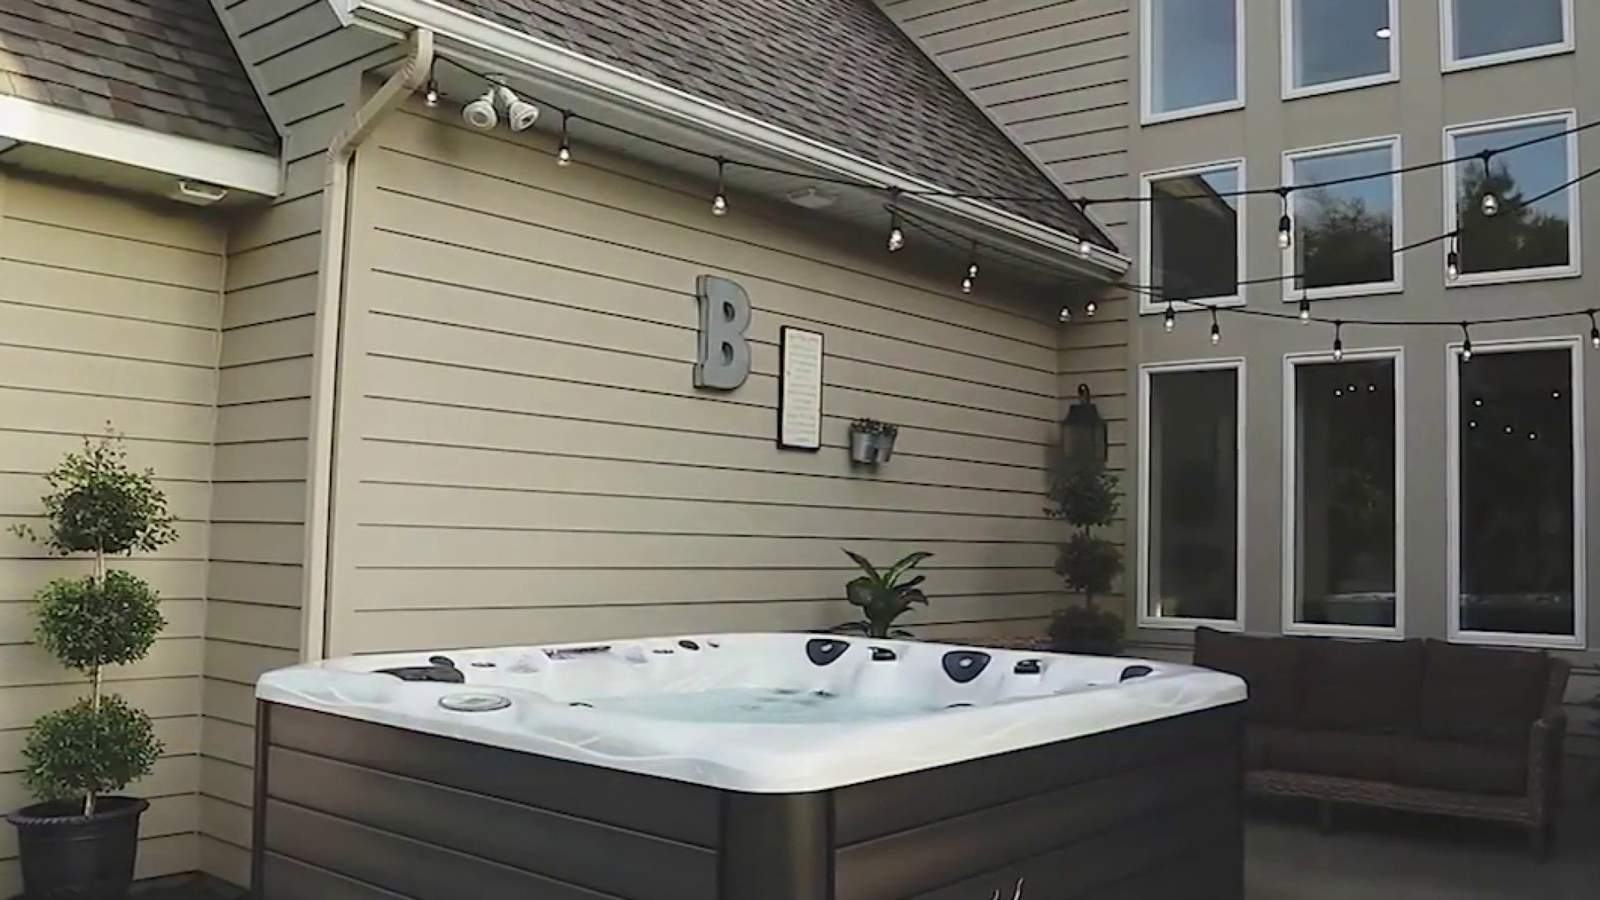 Could soaking in a hot tub be a health benefit? Things to consider before taking the plunge